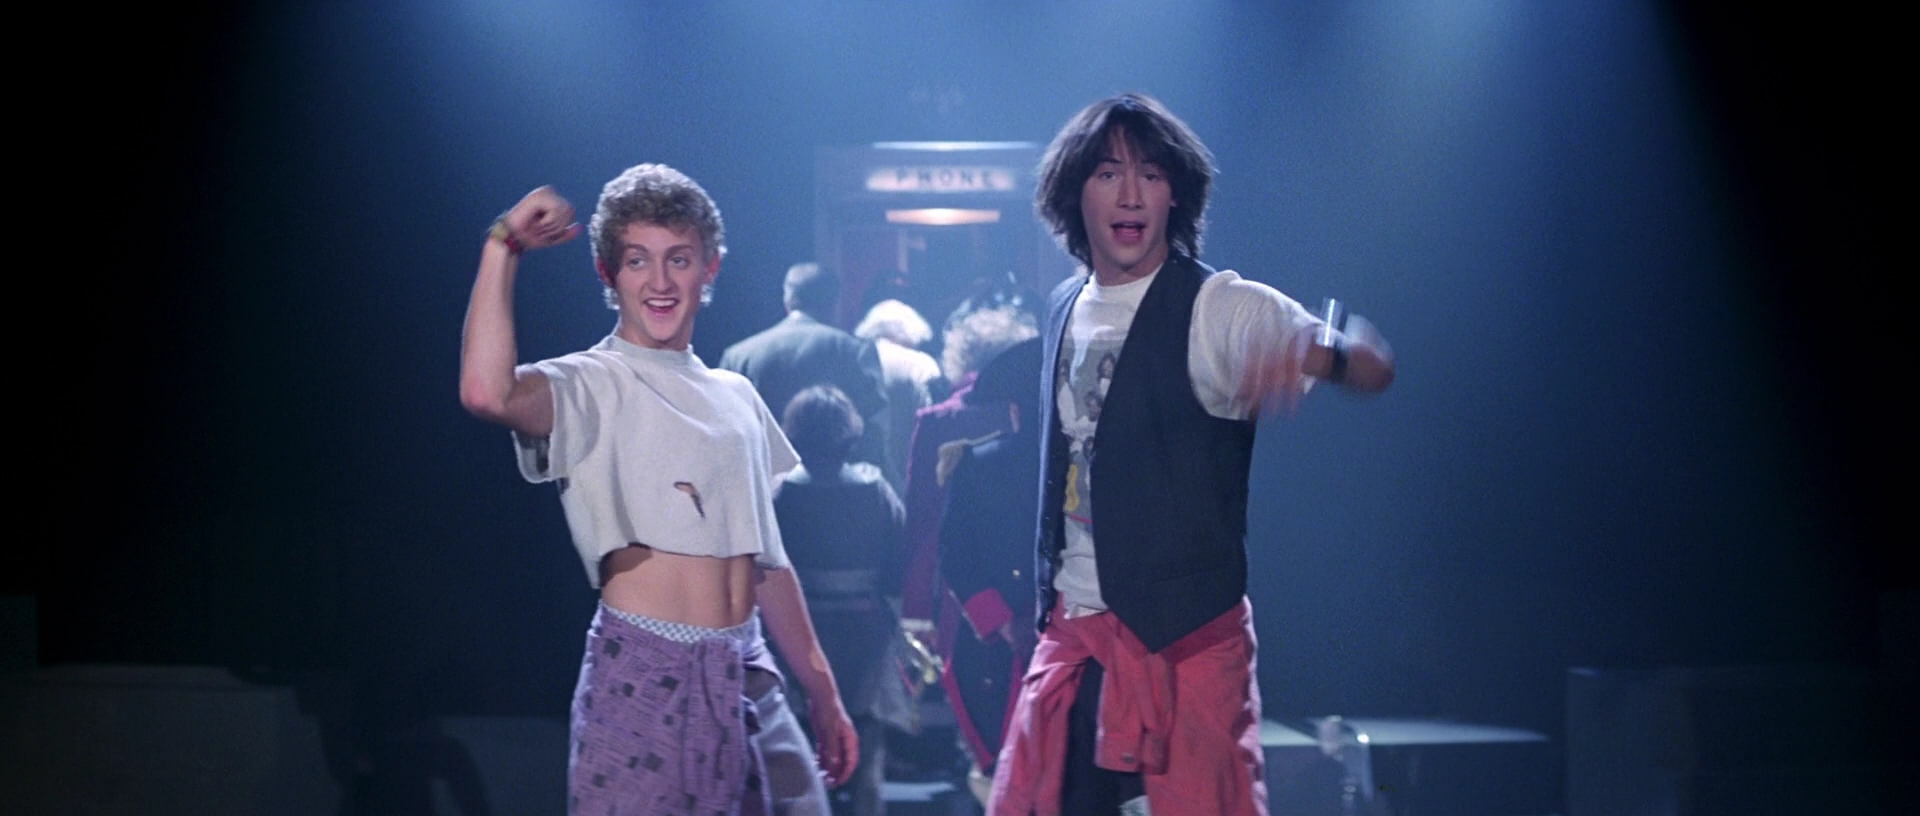 bill and ted's excellent adventure